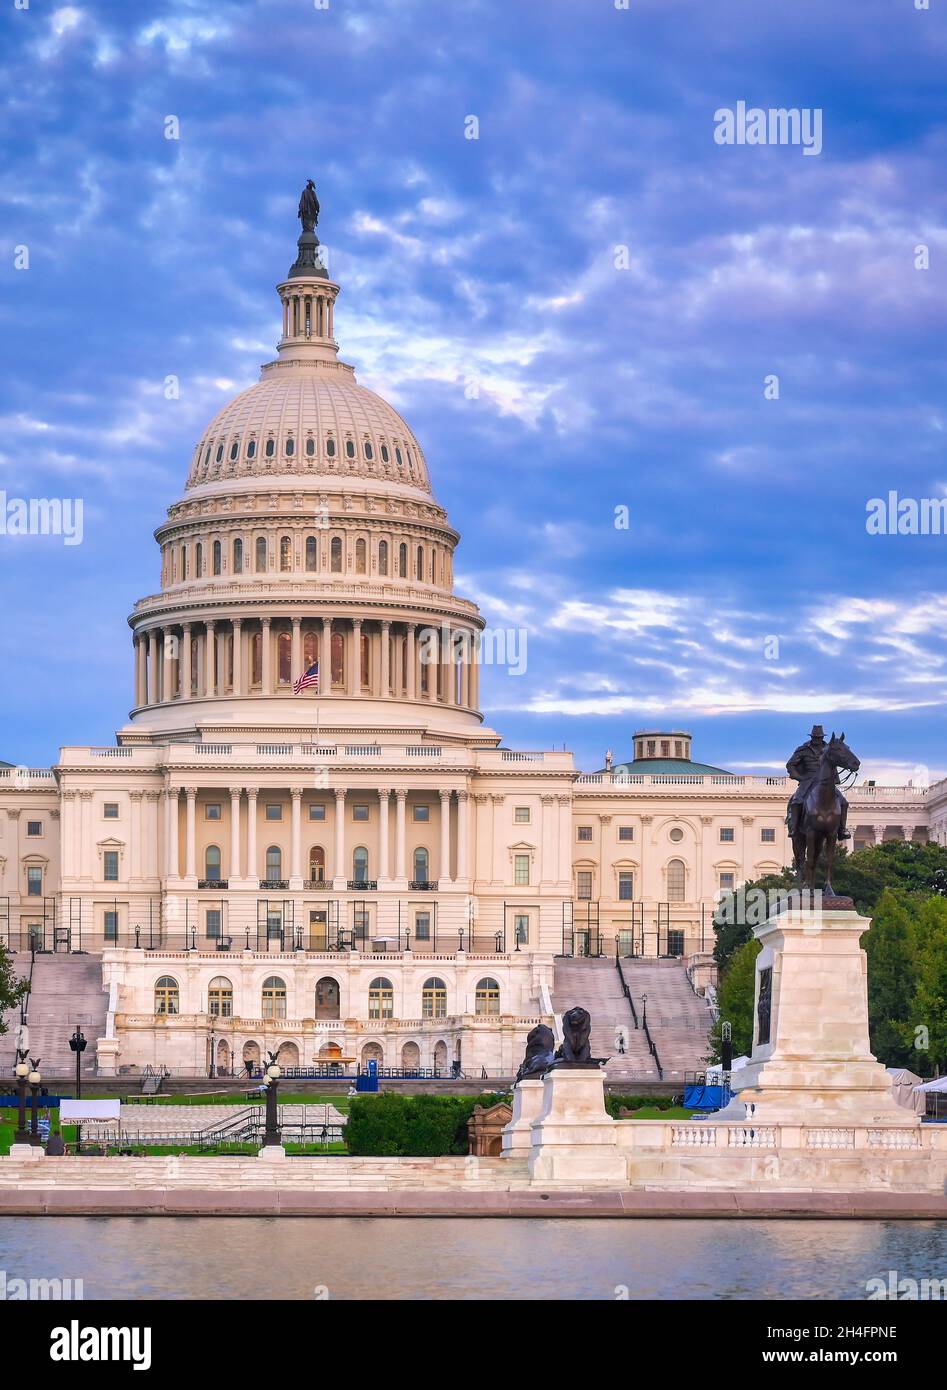 The United States Capitol, the meeting place of the United States Congress, located on Capitol Hill at the eastern end of the National Mall in Washing Stock Photo